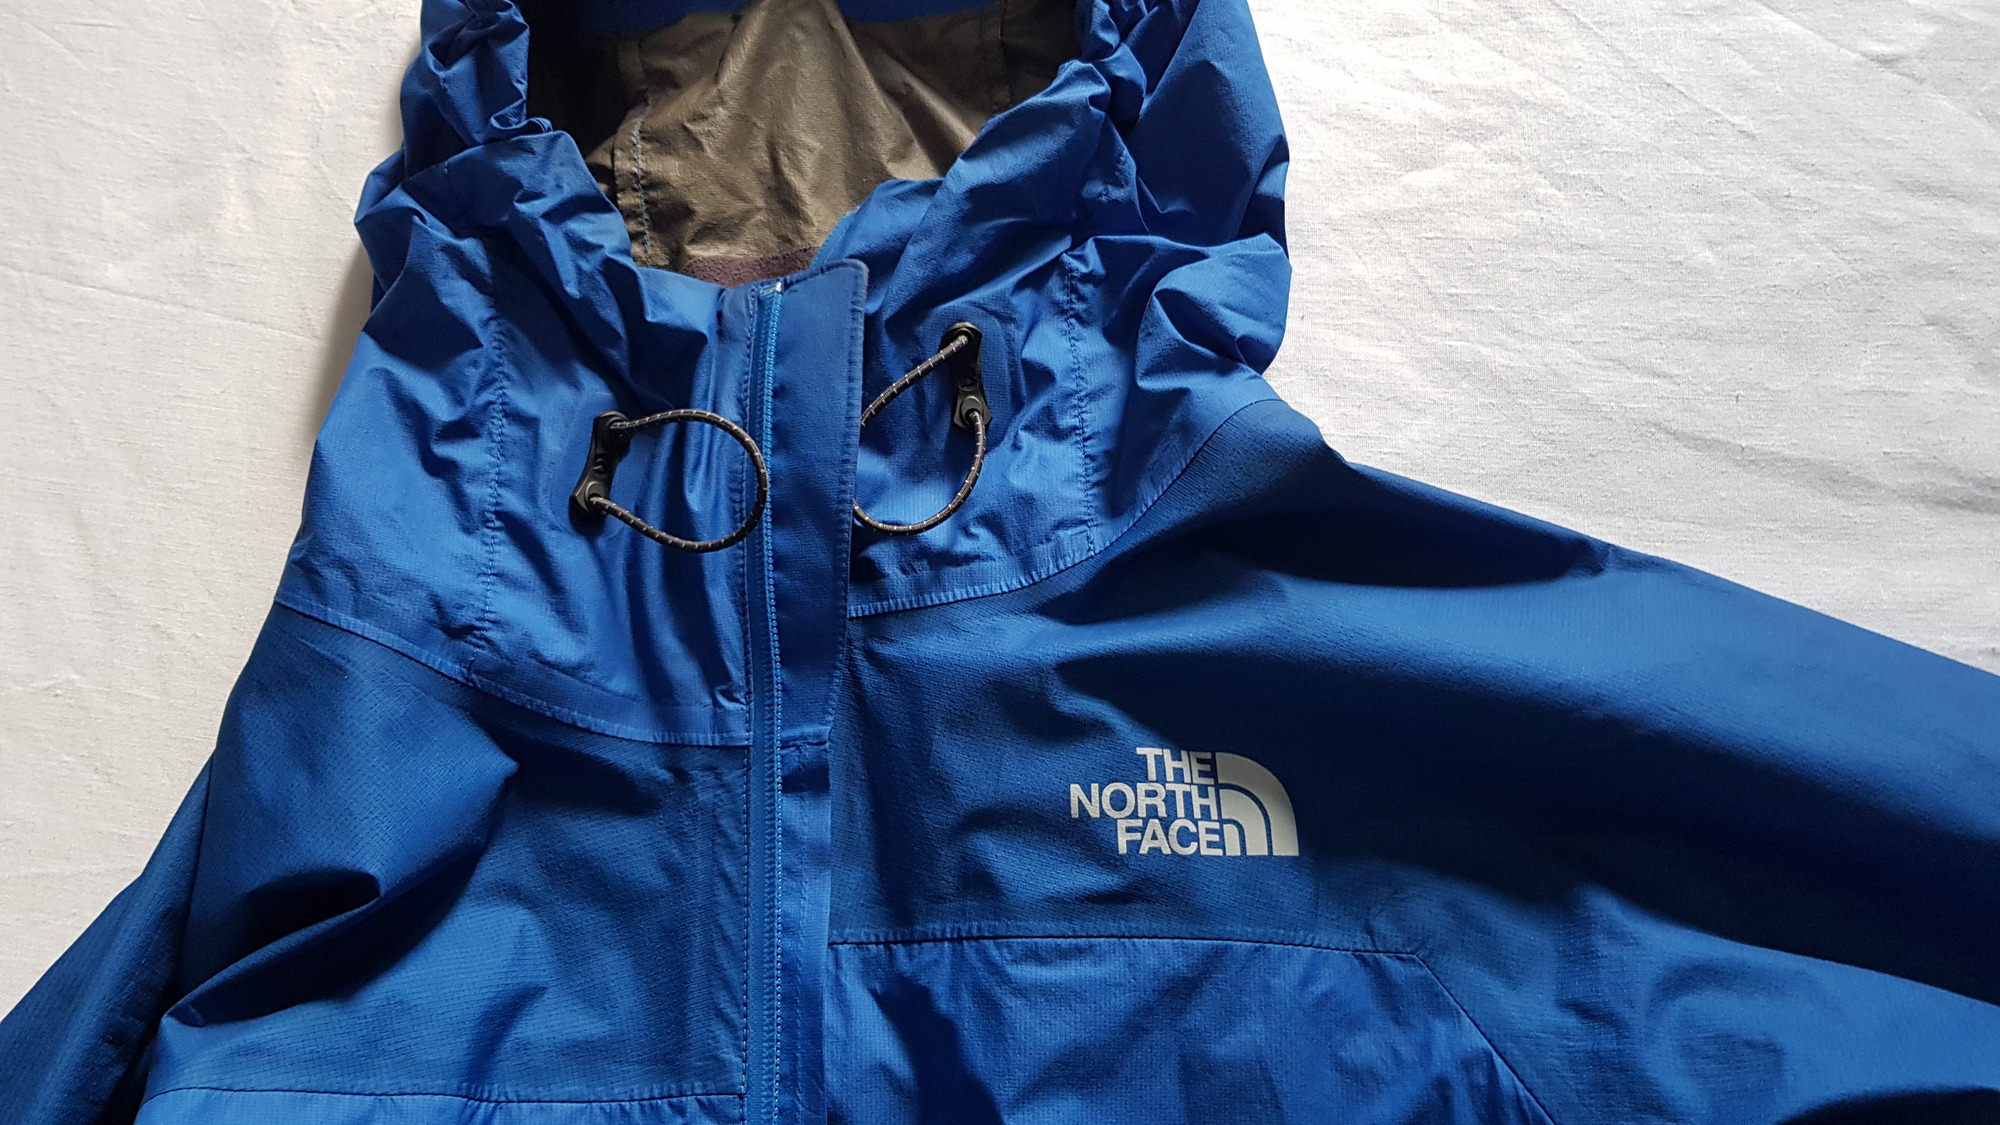 The North Face Gore-tex Pro Shell Summit Series "S"